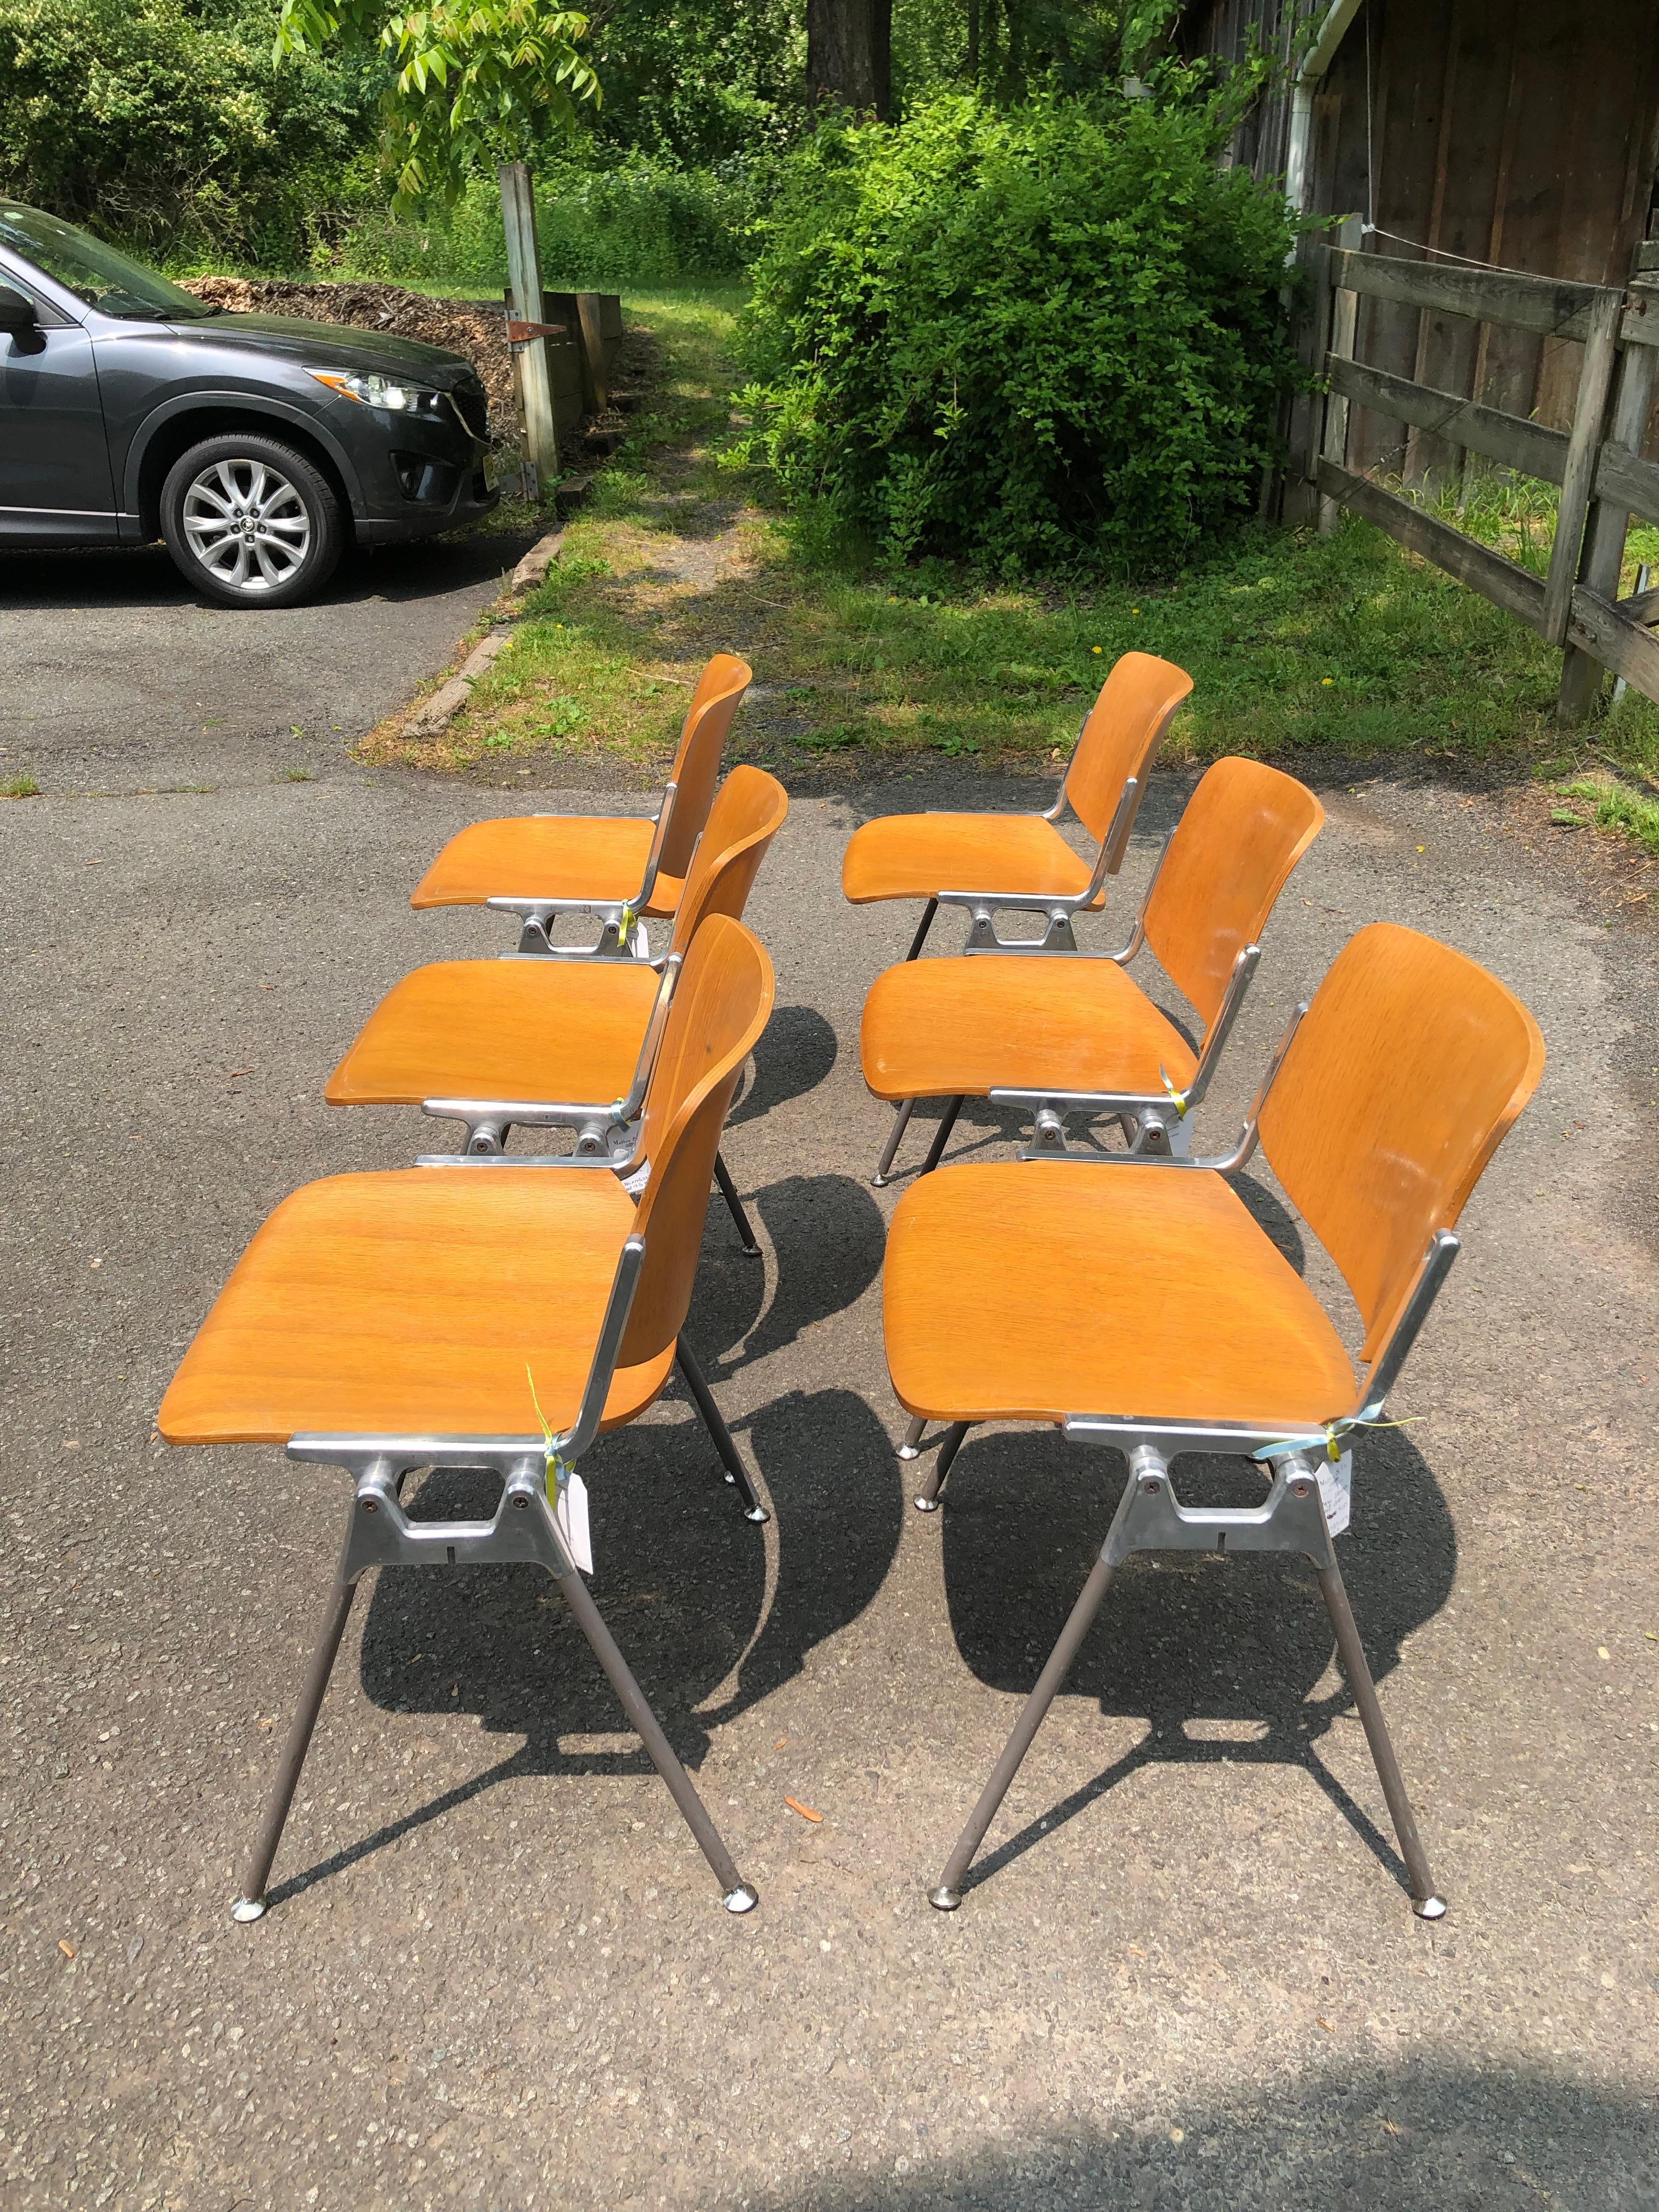 Fabulous set of 6 Italian plywood and steel industrial style schoolhouse chairs having authentic character and just the right amount of wear. Well constructed solid and heavy; can withstand a beating!
seat depth 17.5.